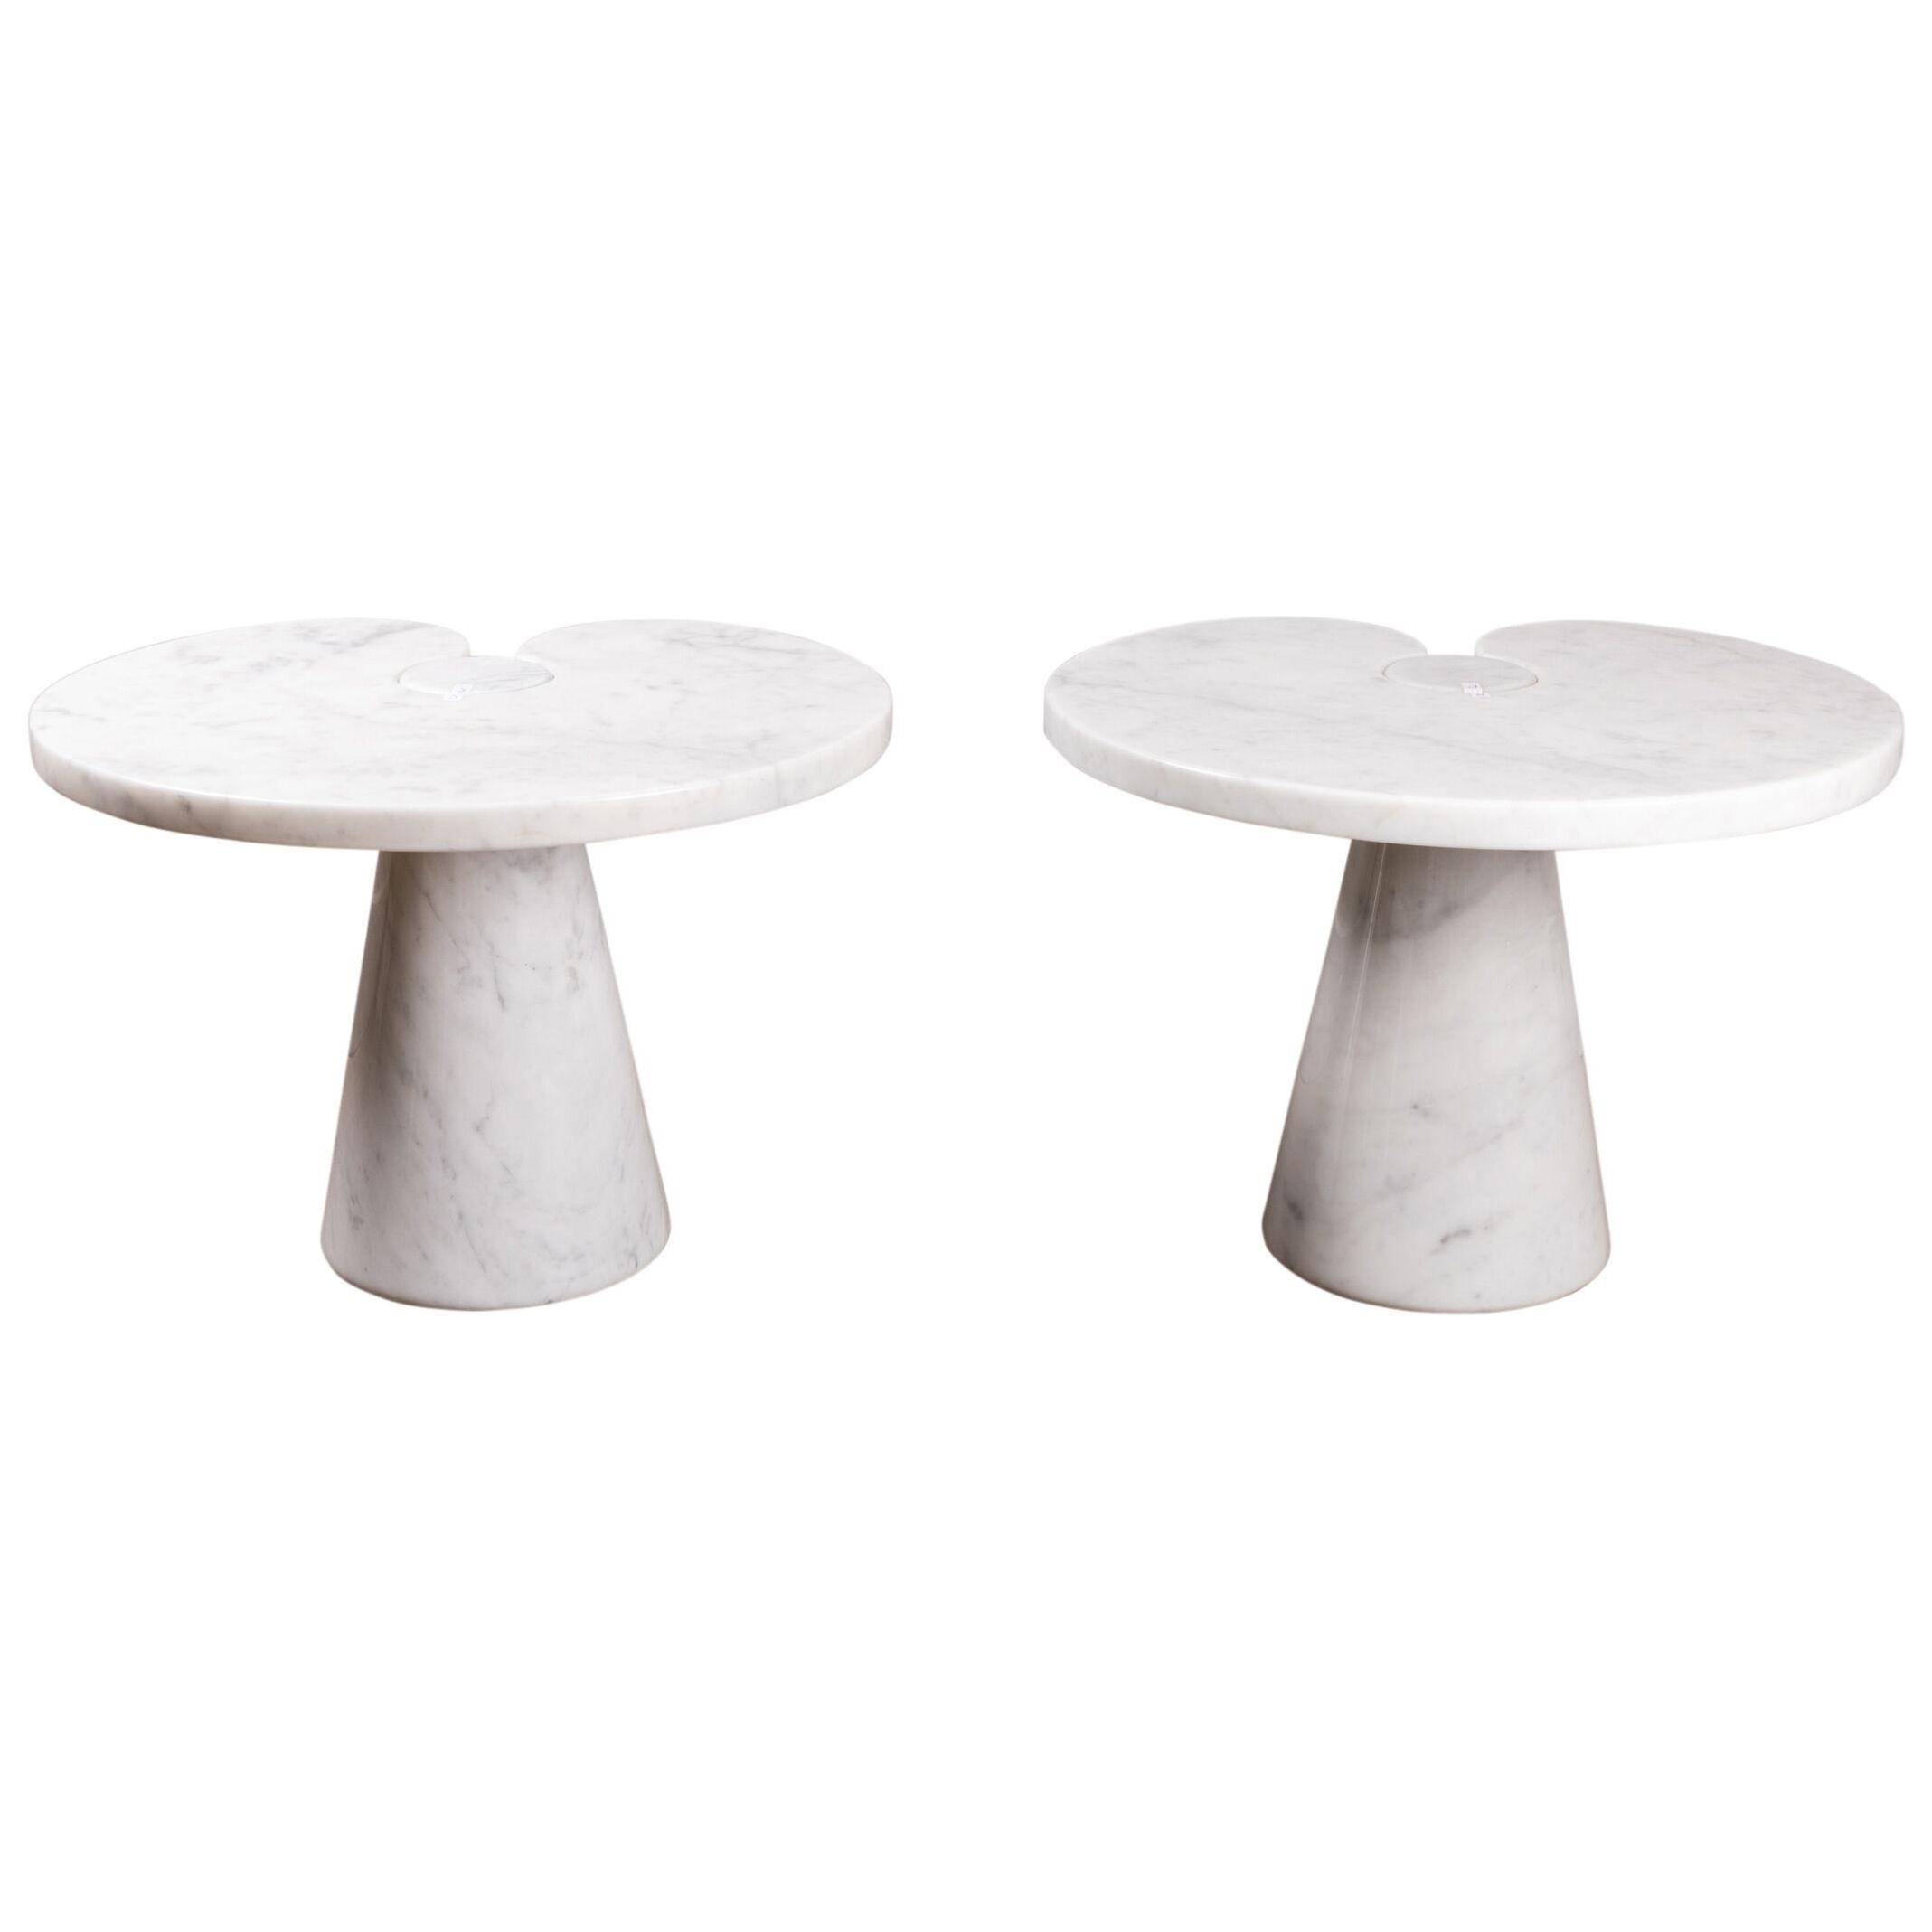 Pair of "Eros" Marble Tables, Designed by Angelo Mangiarotti for Skipper